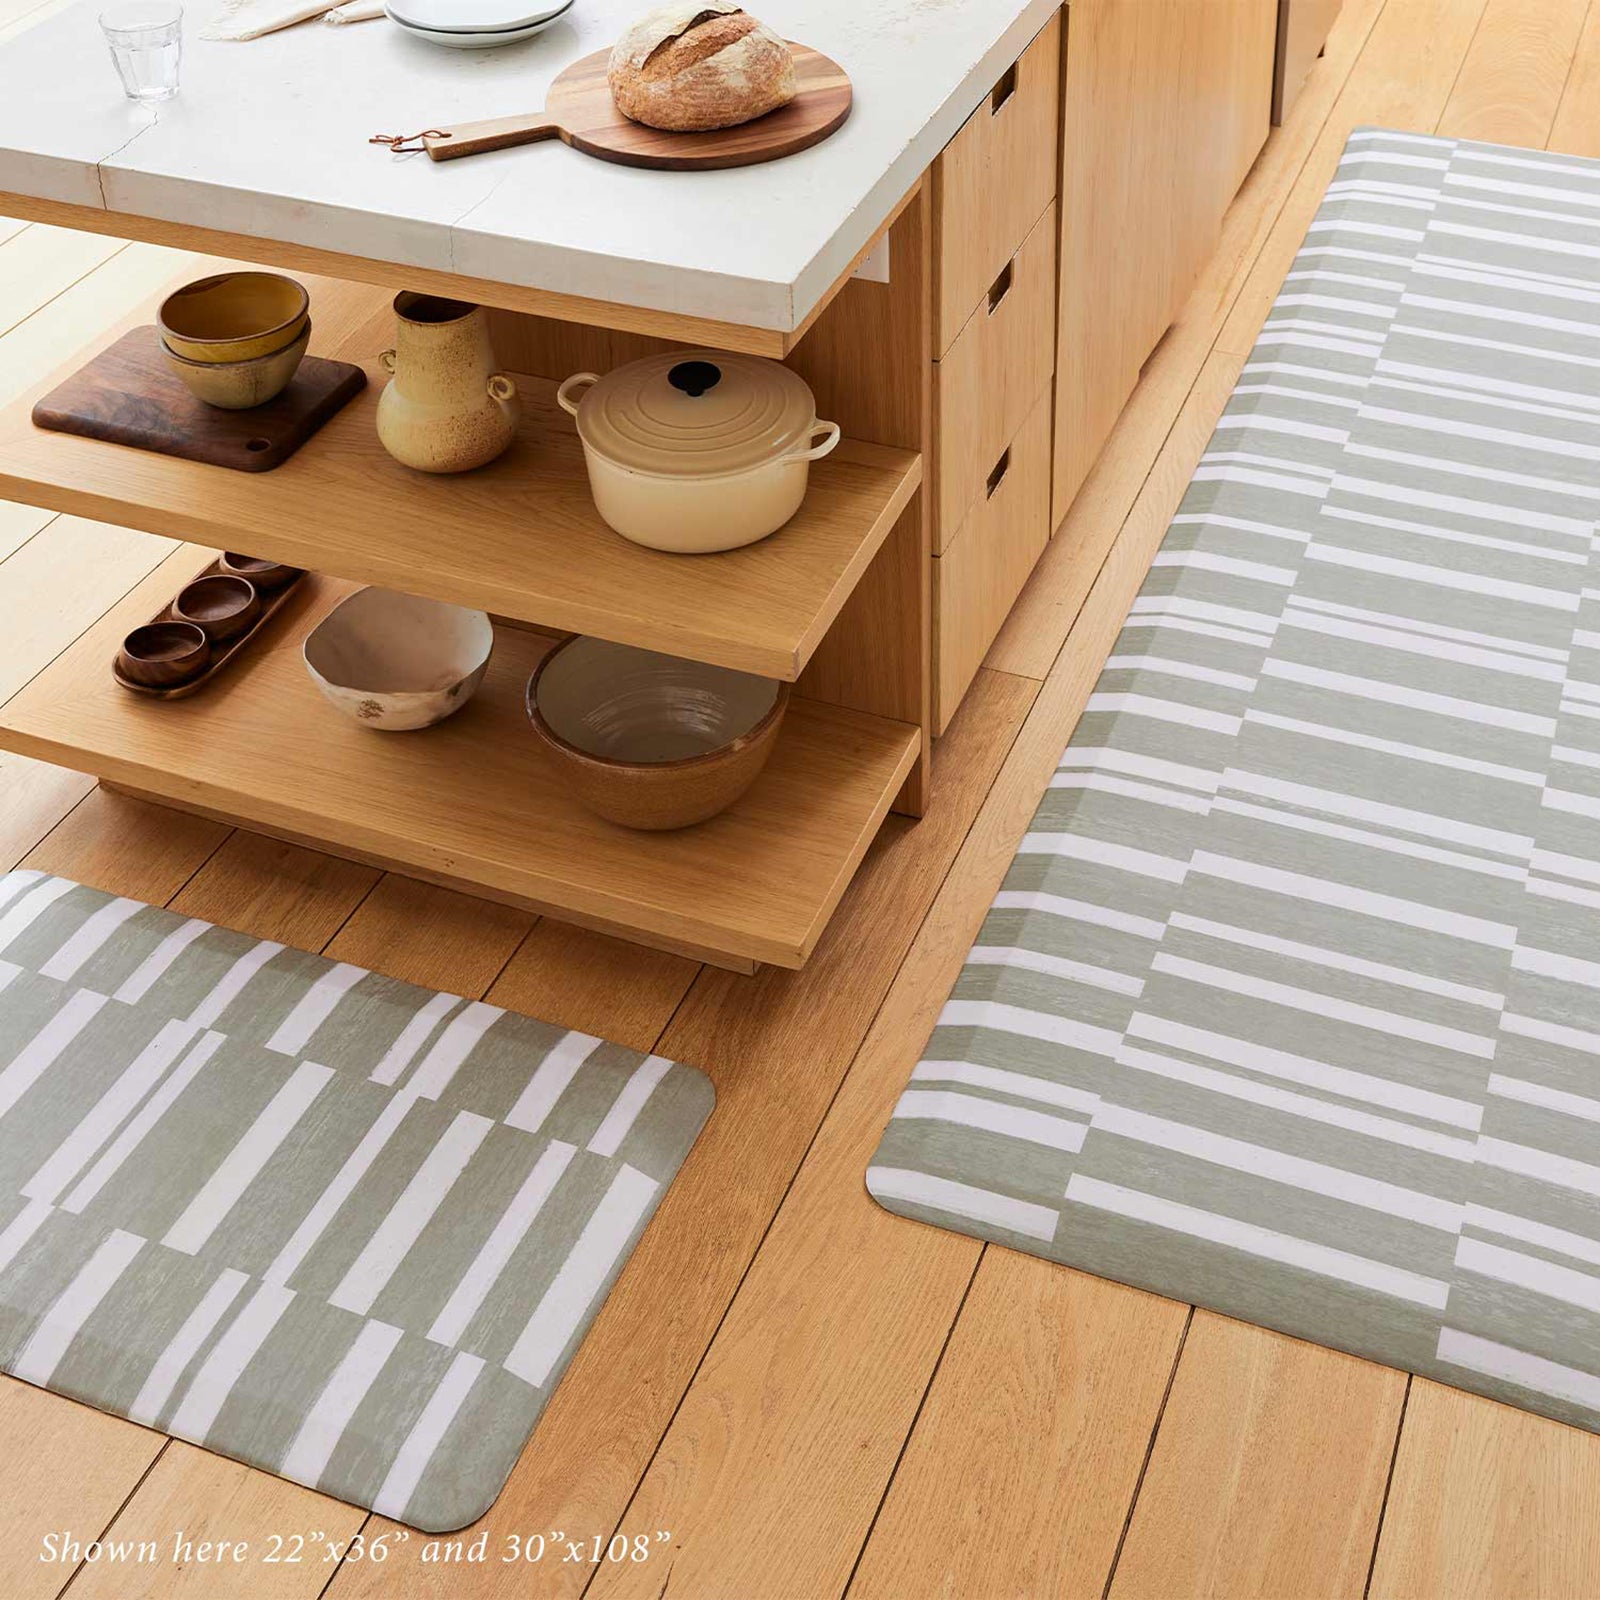 sutton stripe basil olive green and white inverted stripe standing mat shown in light wood toned kitchen with sizes 22x36 and 30x108 shown around the island